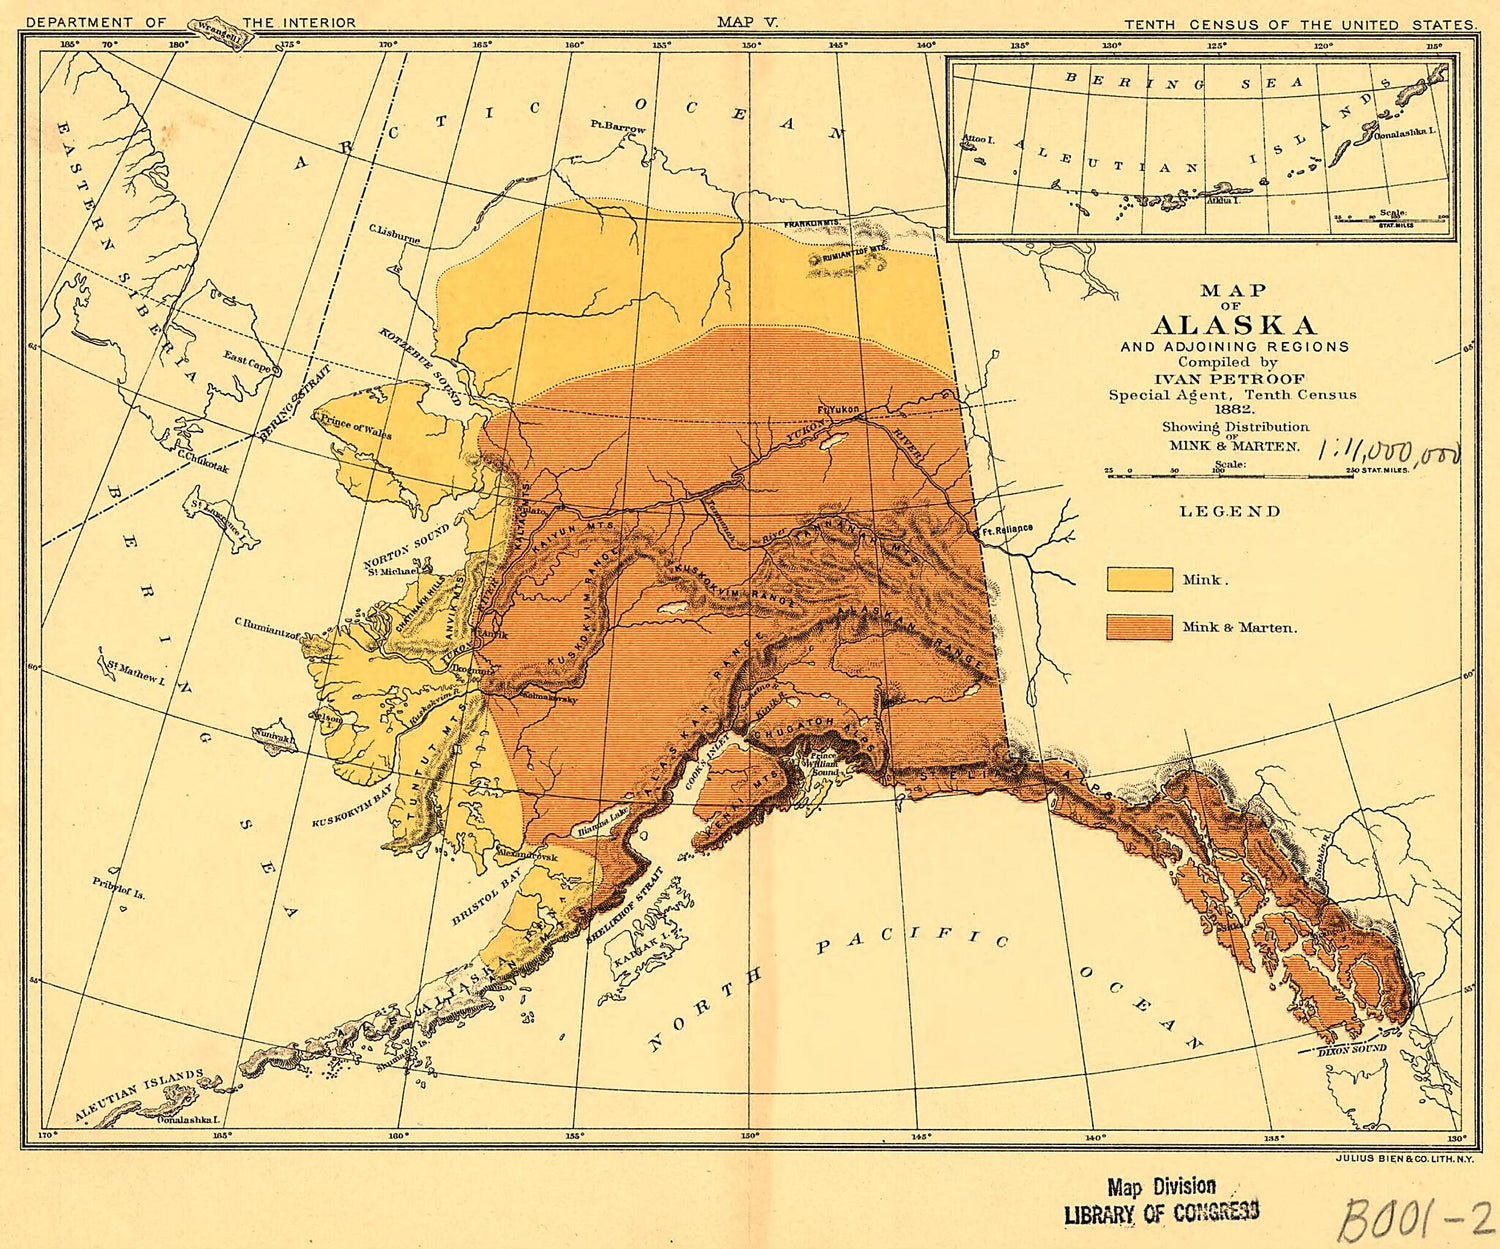 This old map of Map of Alaska and Adjoining Regions from 1882 was created by Ivan Petroff,  United States. Department of the Interior in 1882